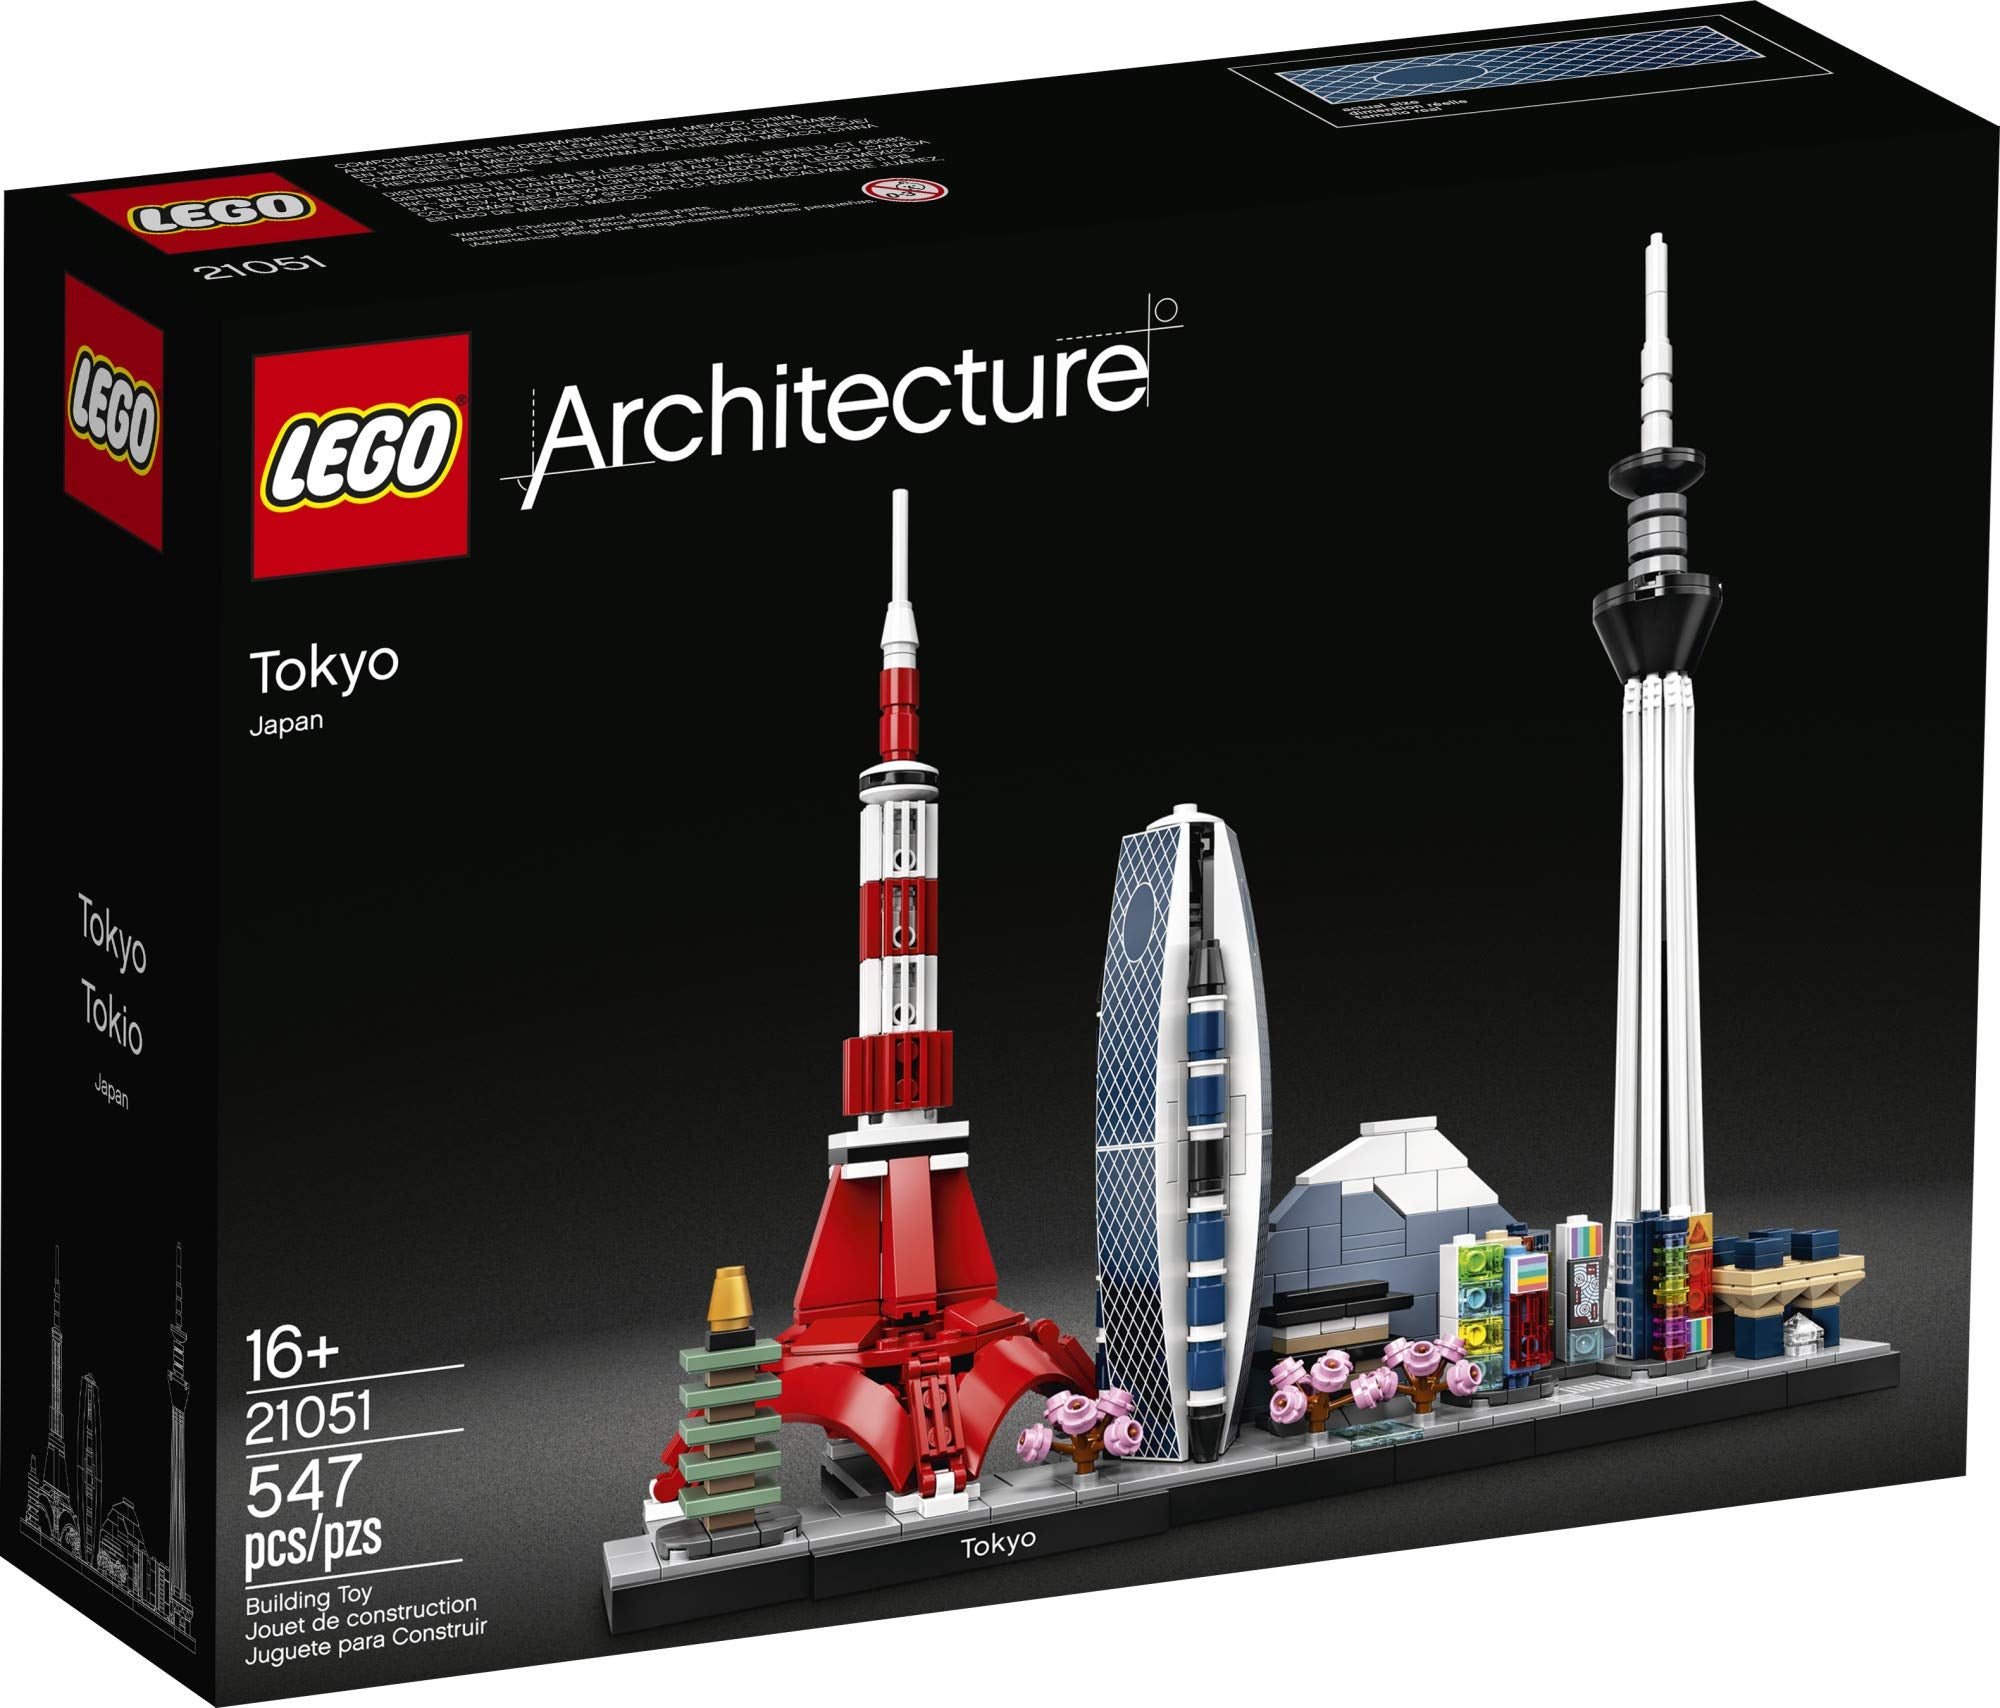 LEGO Architecture Skylines: Tokyo 21051 Building Kit, Collectible Architecture Building Set for Adults, New 2020 (547 Pieces) (Open Box, Like New)